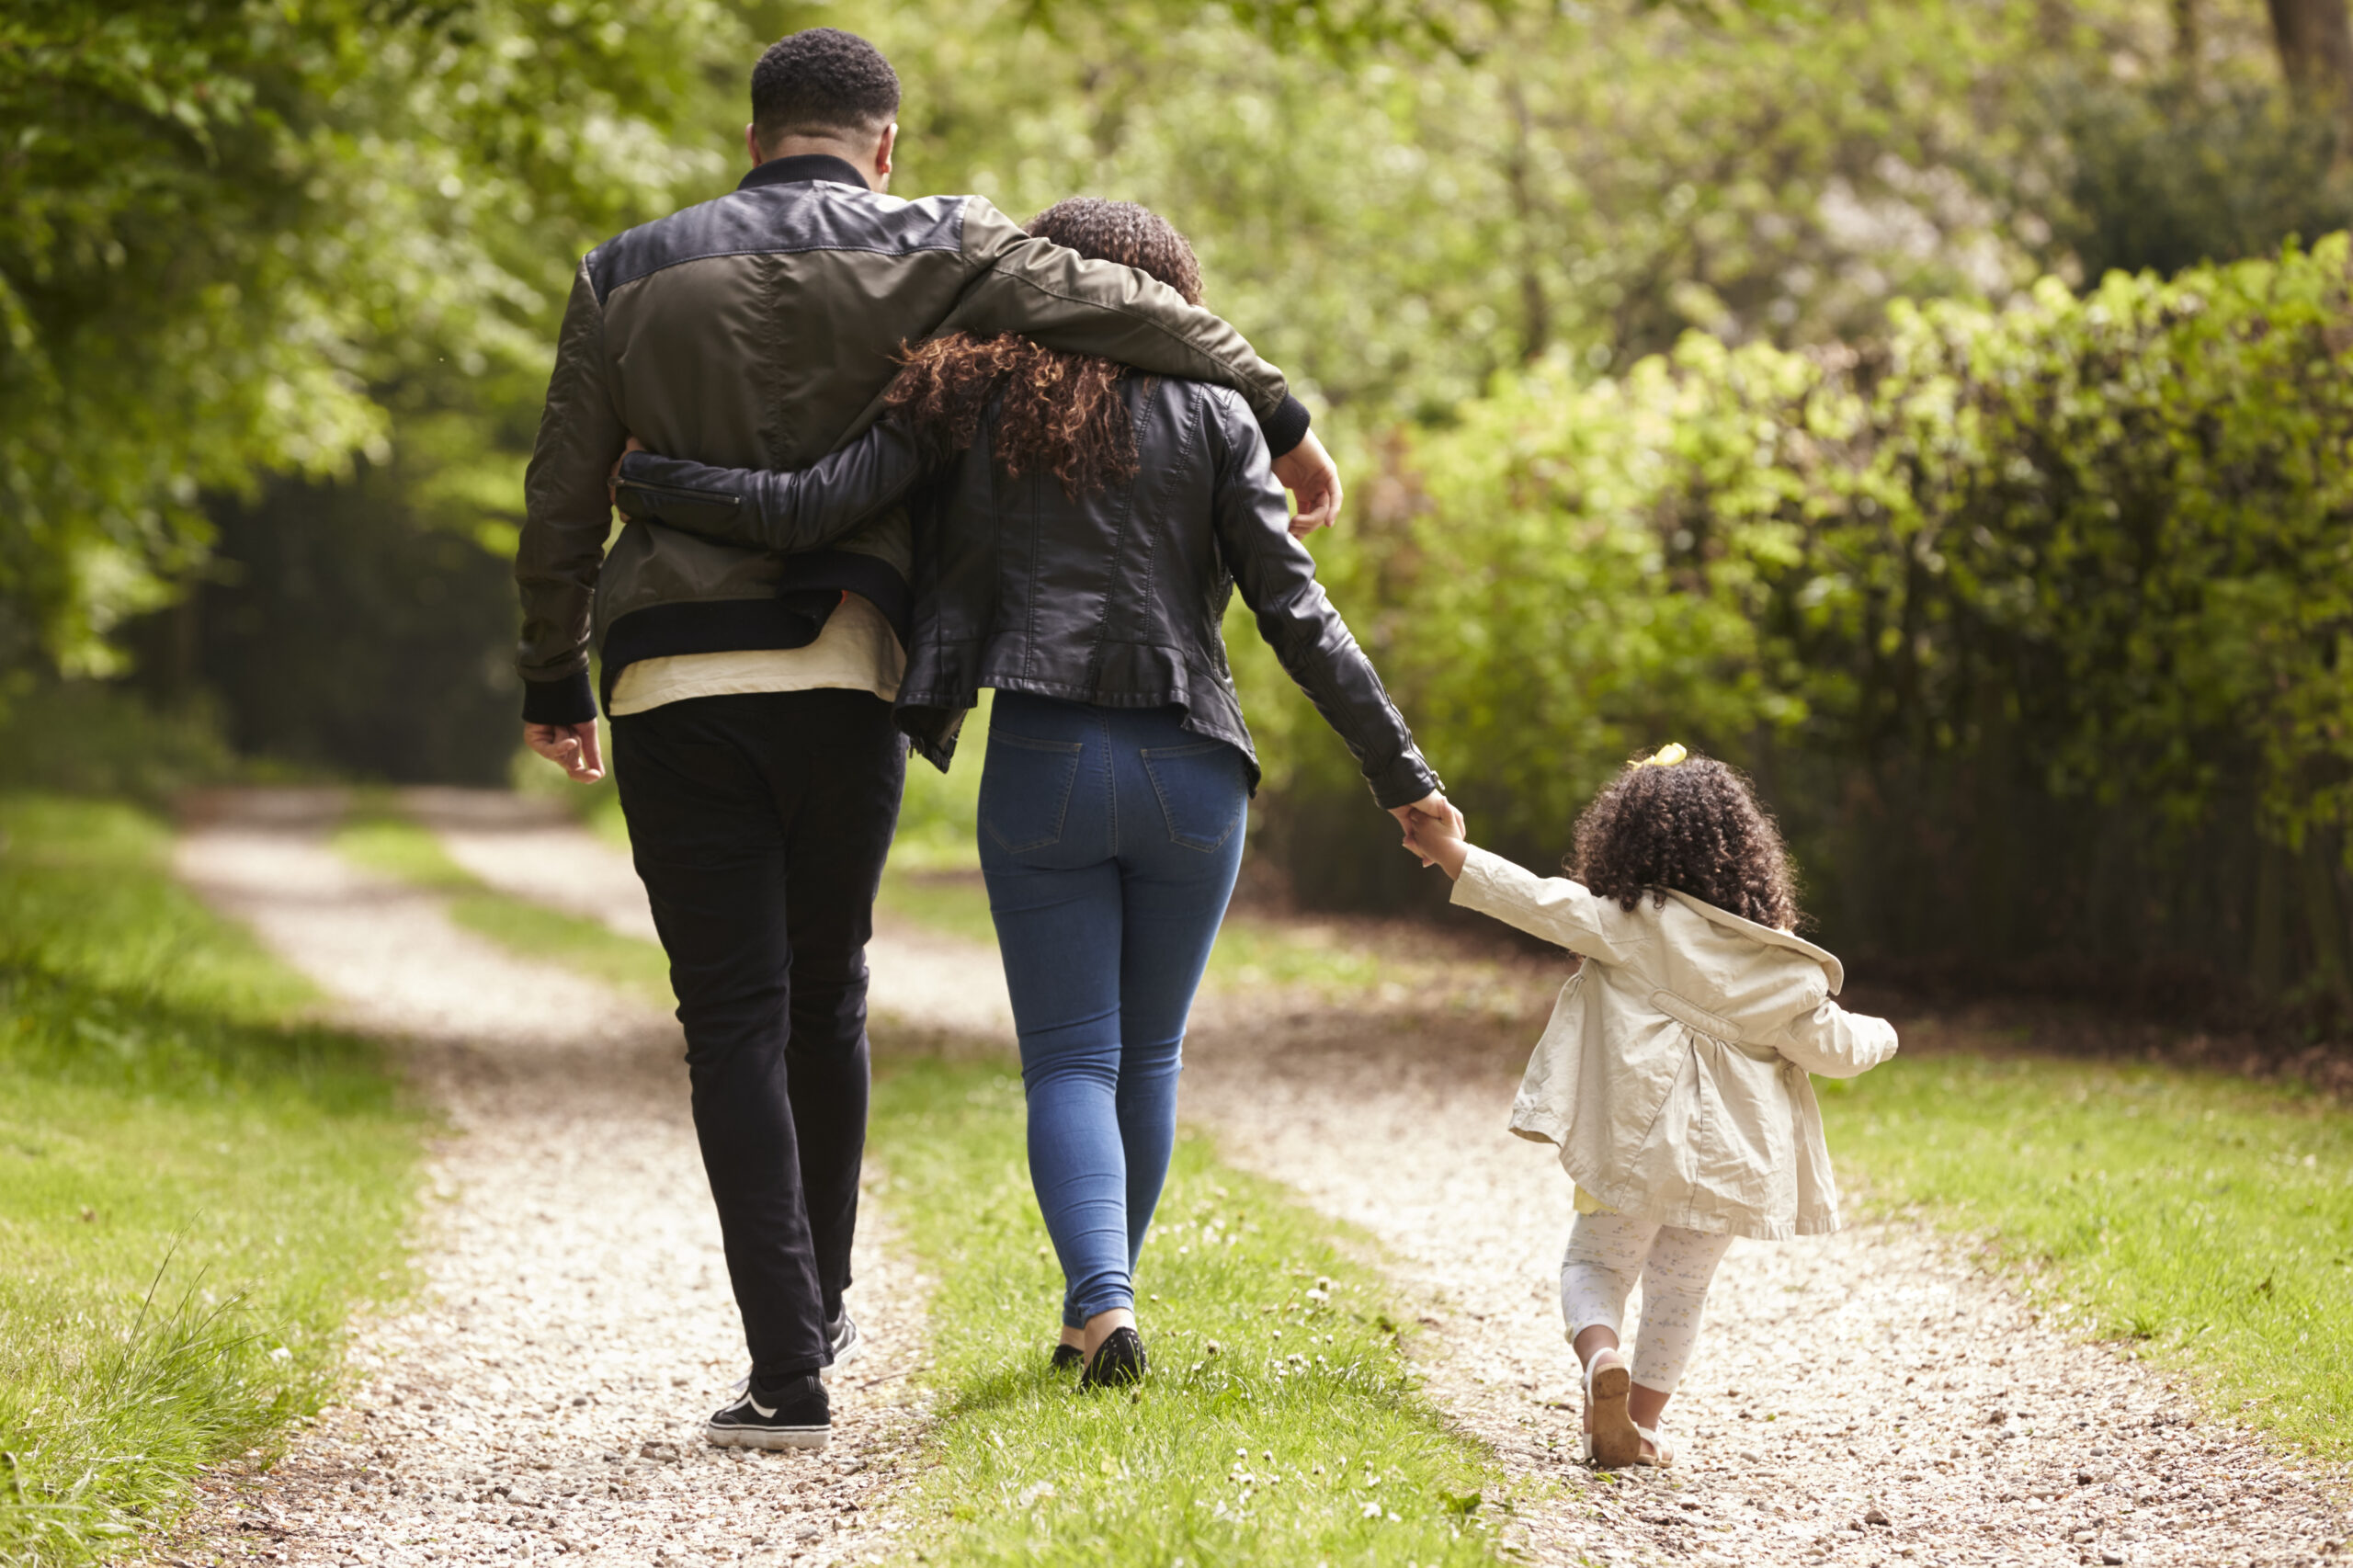 Couple with young daughter on a country walk, back view